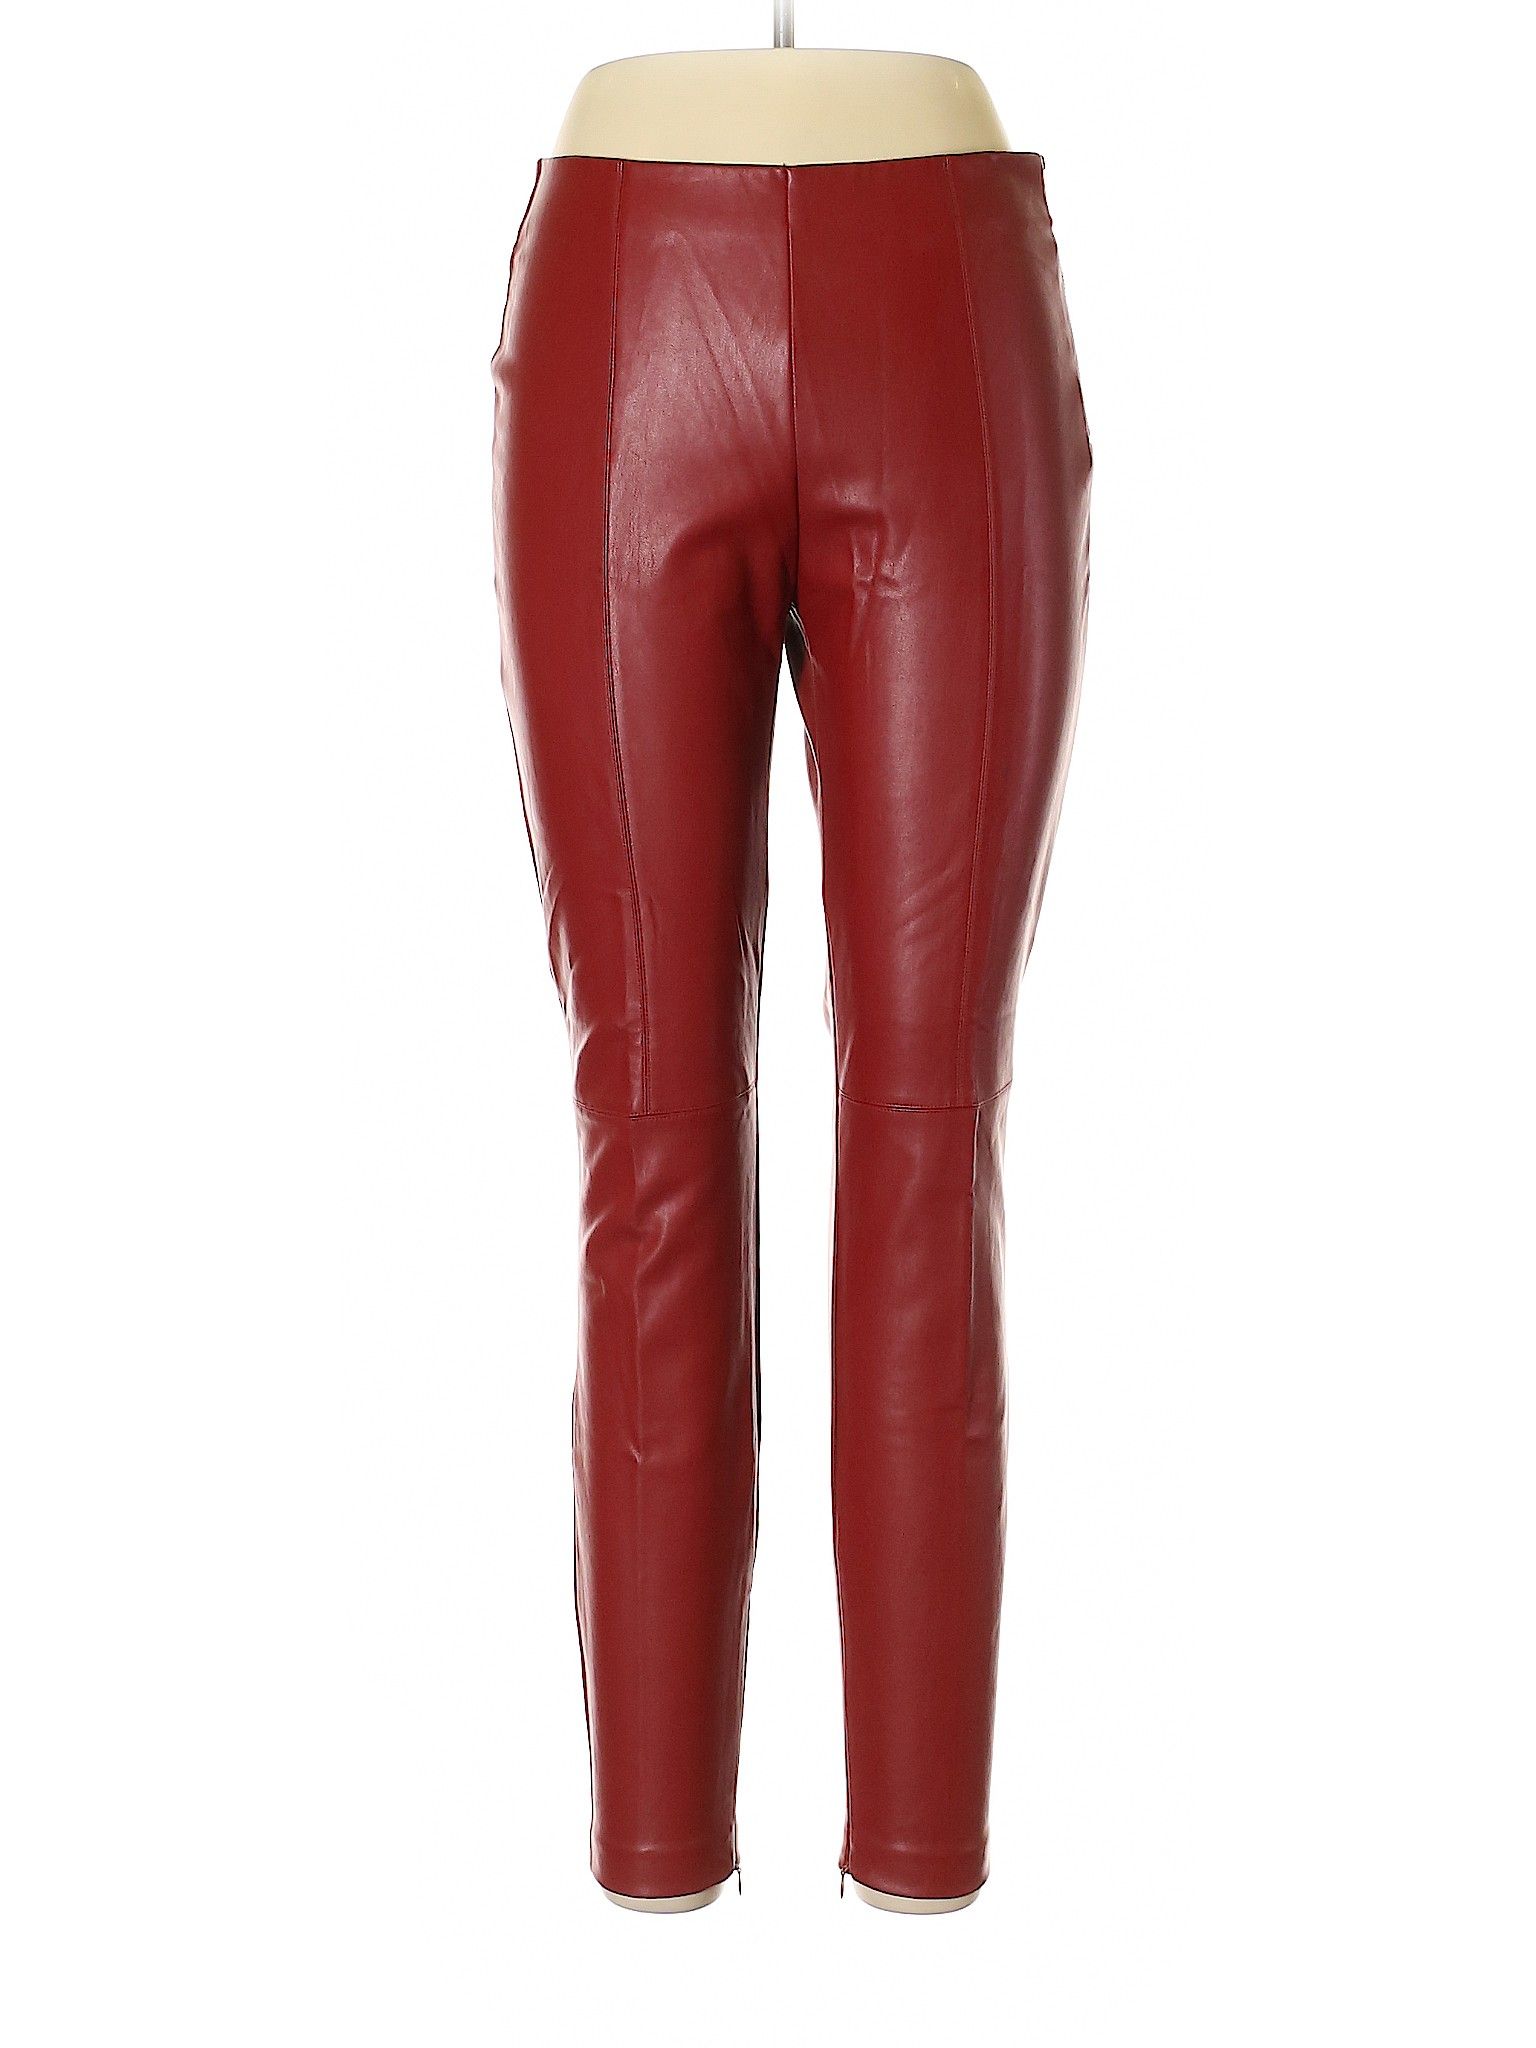 Trafaluc by Zara Leather Pants Size 12: Red Women's Bottoms - 45219553 | thredUP